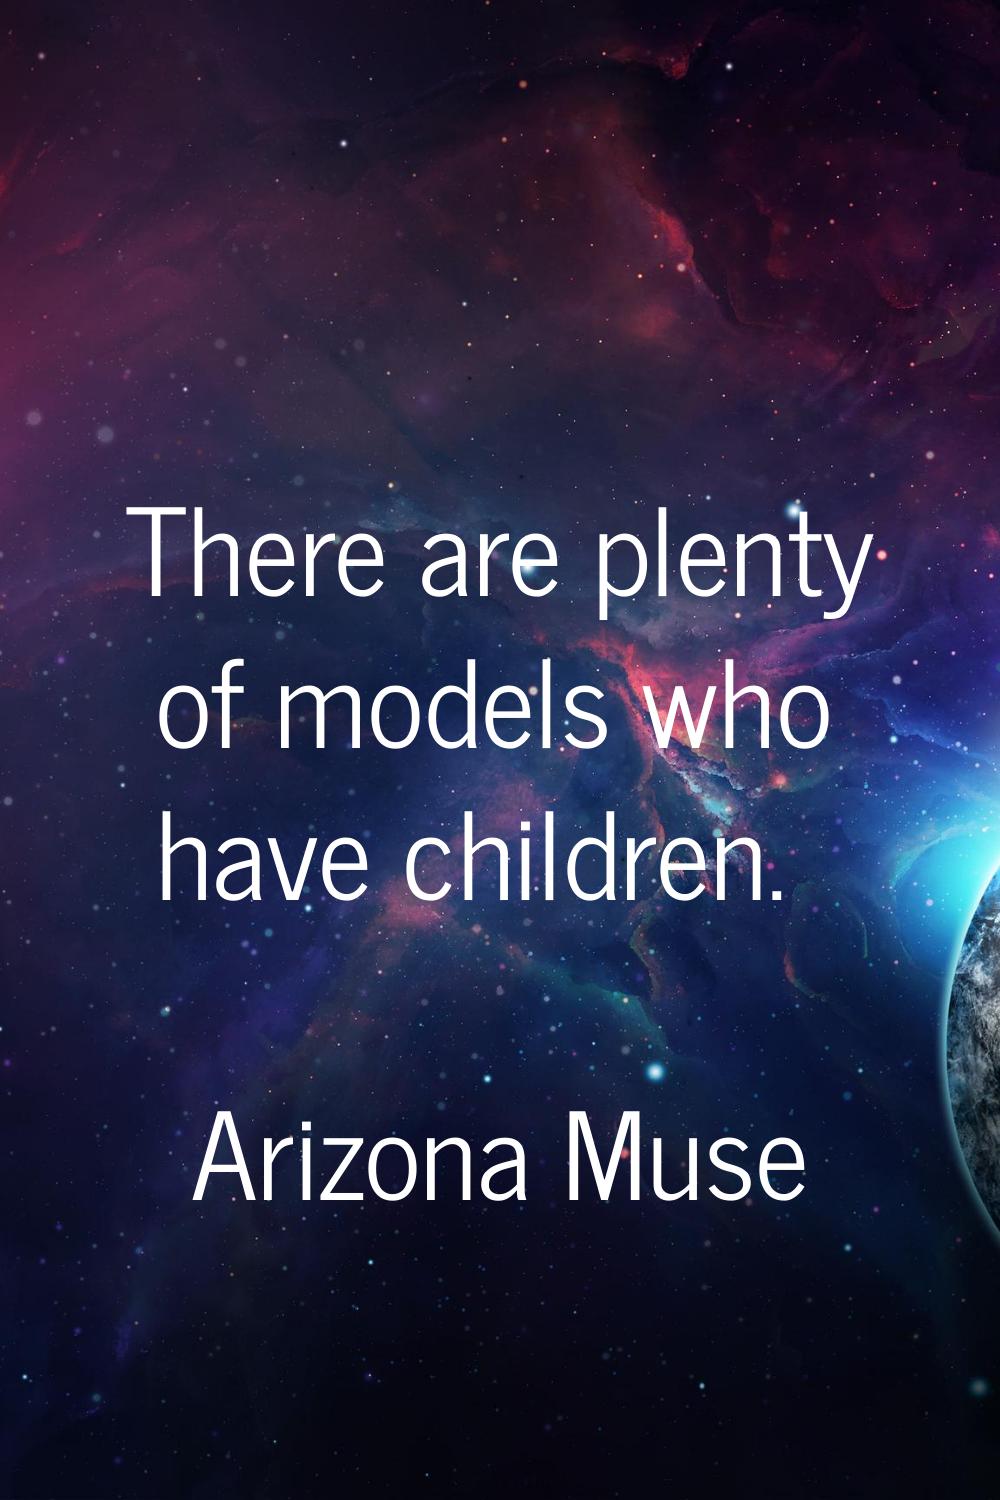 There are plenty of models who have children.